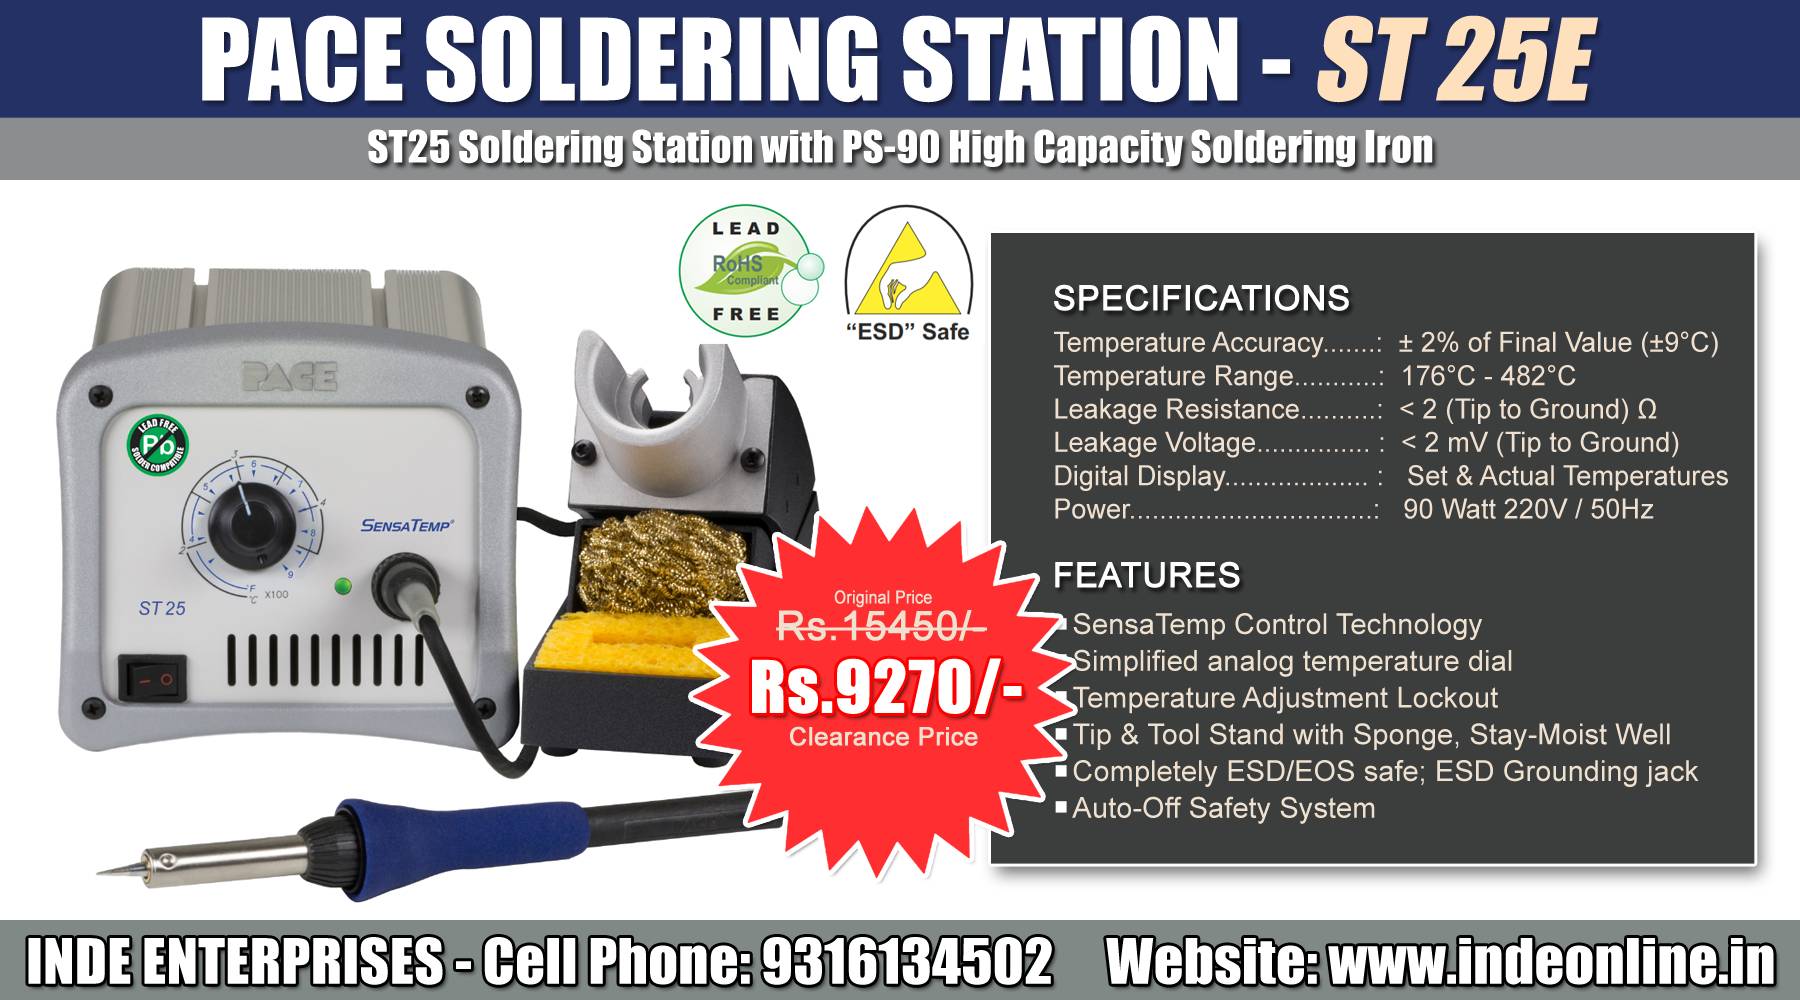 PACE Soldering Station ST25E Price Rs.9270/-